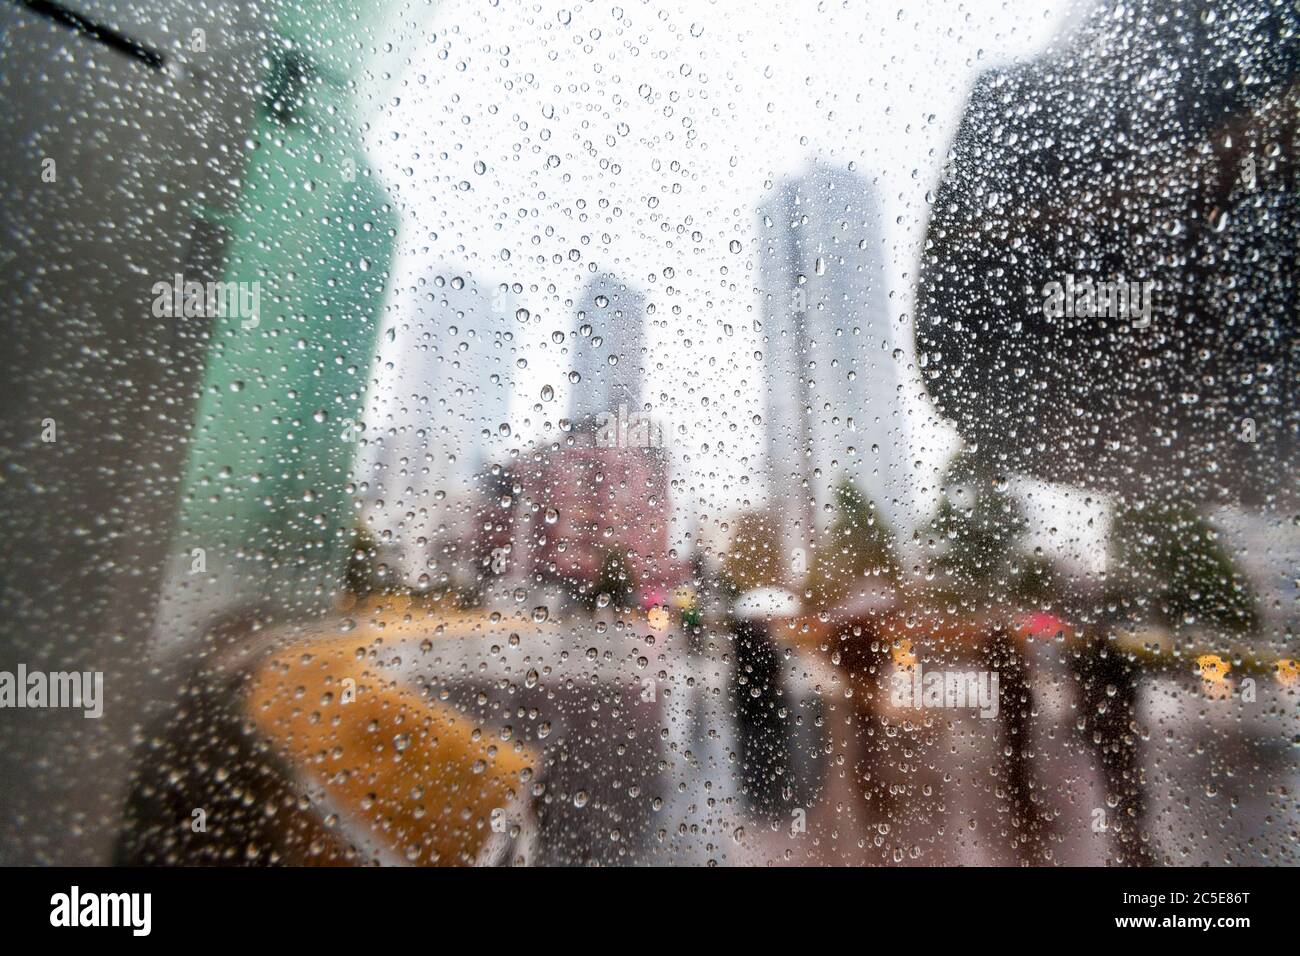 Rain droplets on a window with modern city architecture and people carrying umbrellas out-of-focus in the background. Stock Photo